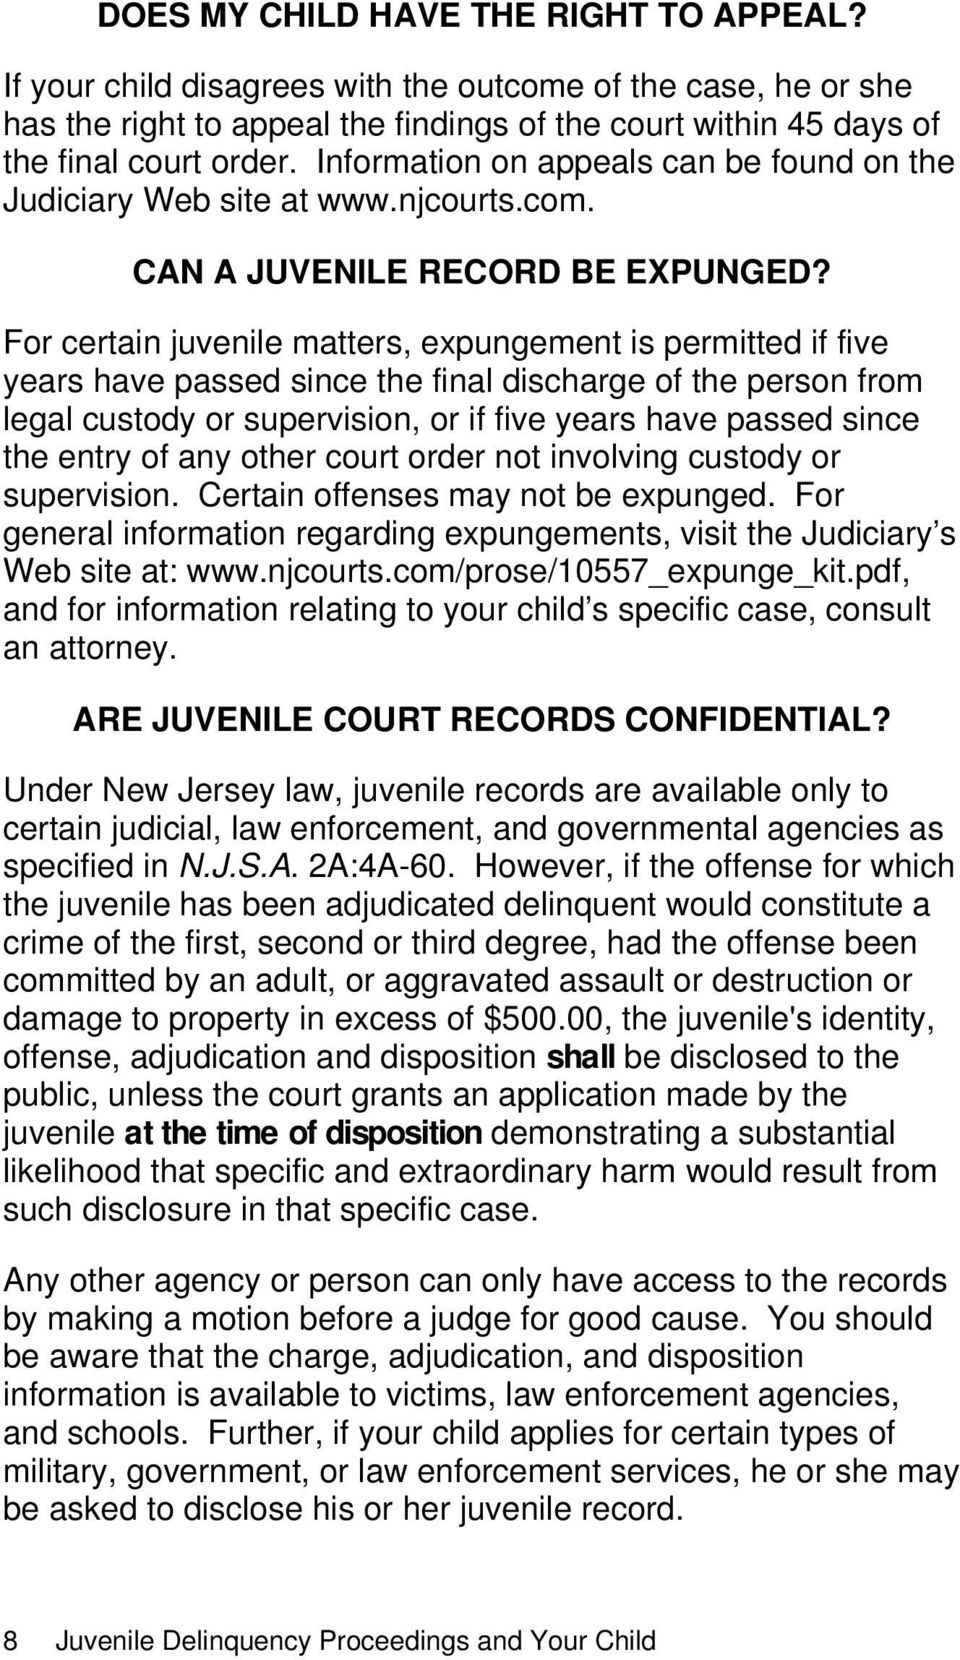 For certain juvenile matters, expungement is permitted if five years have passed since the final discharge of the person from legal custody or supervision, or if five years have passed since the